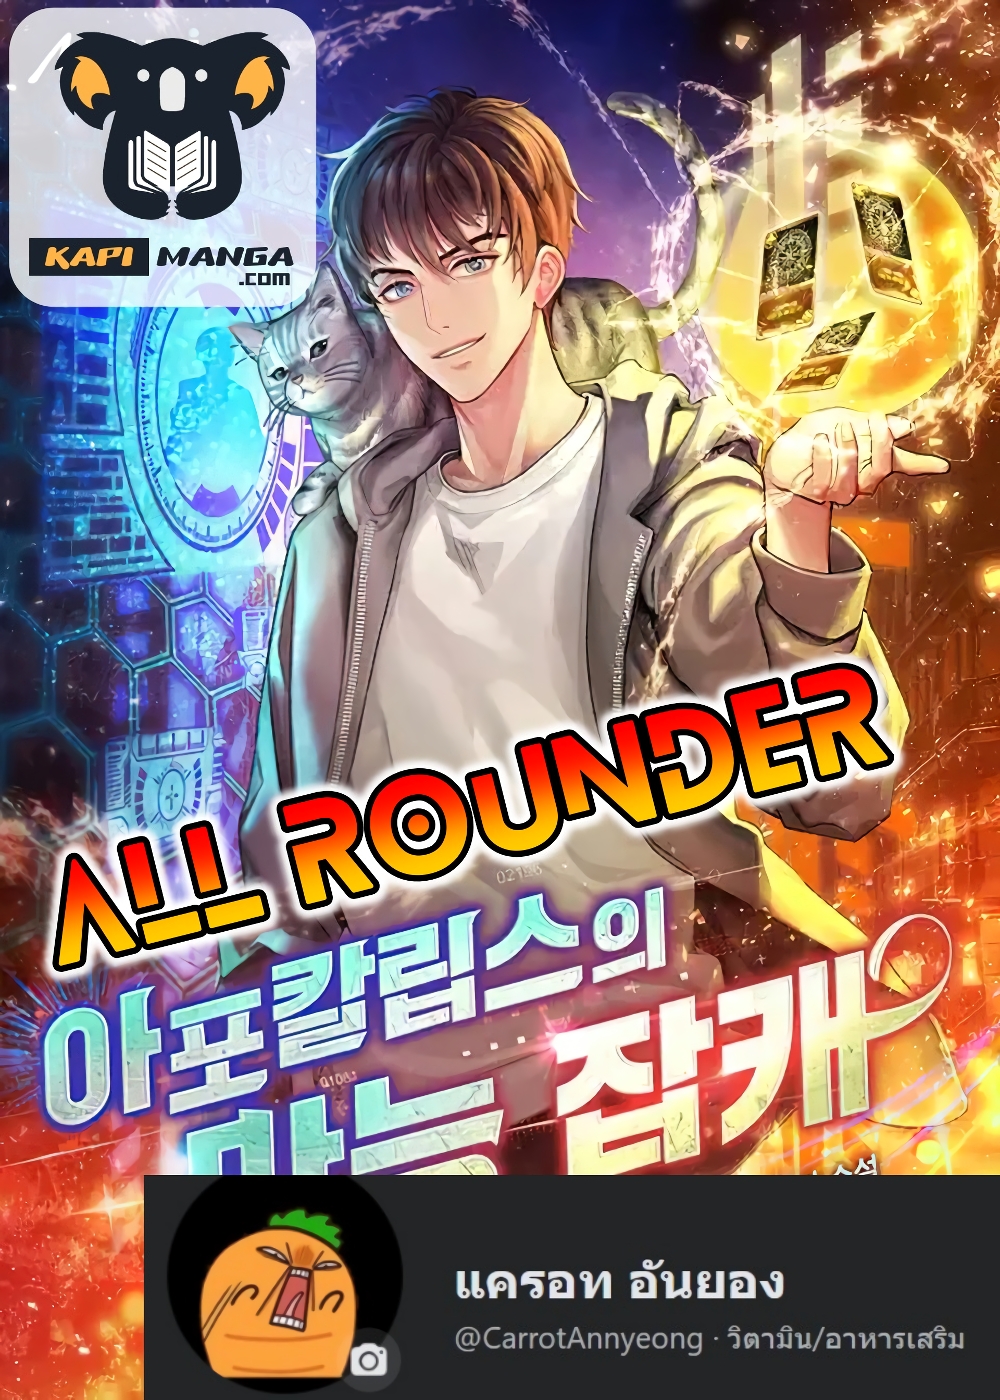 All Rounder6 (1)